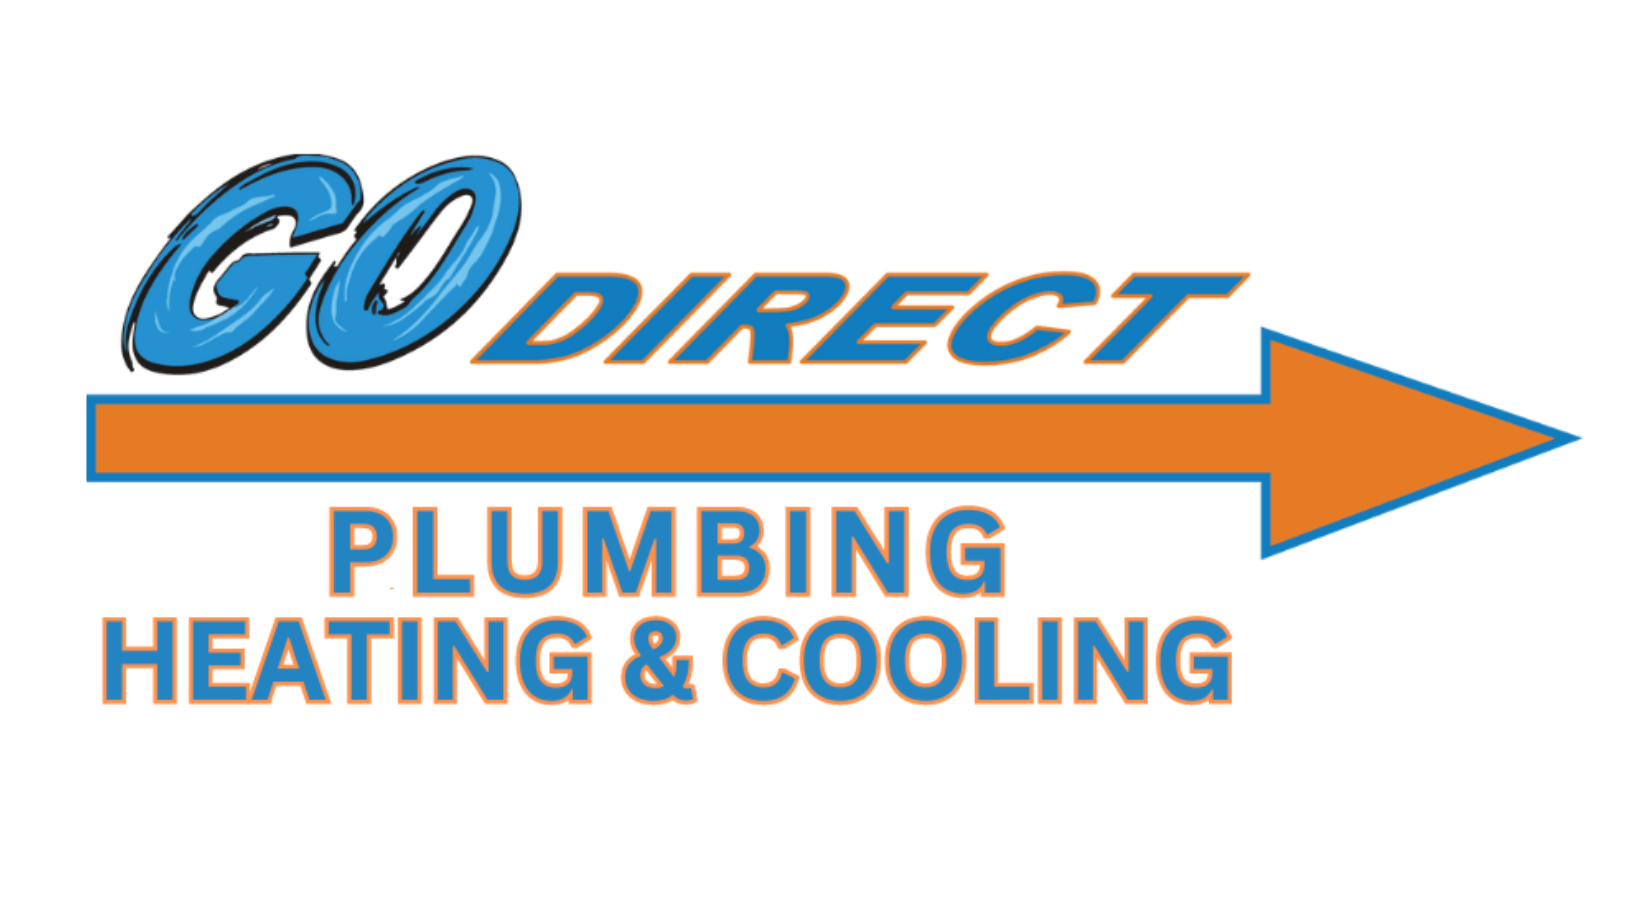 Go Direct Services